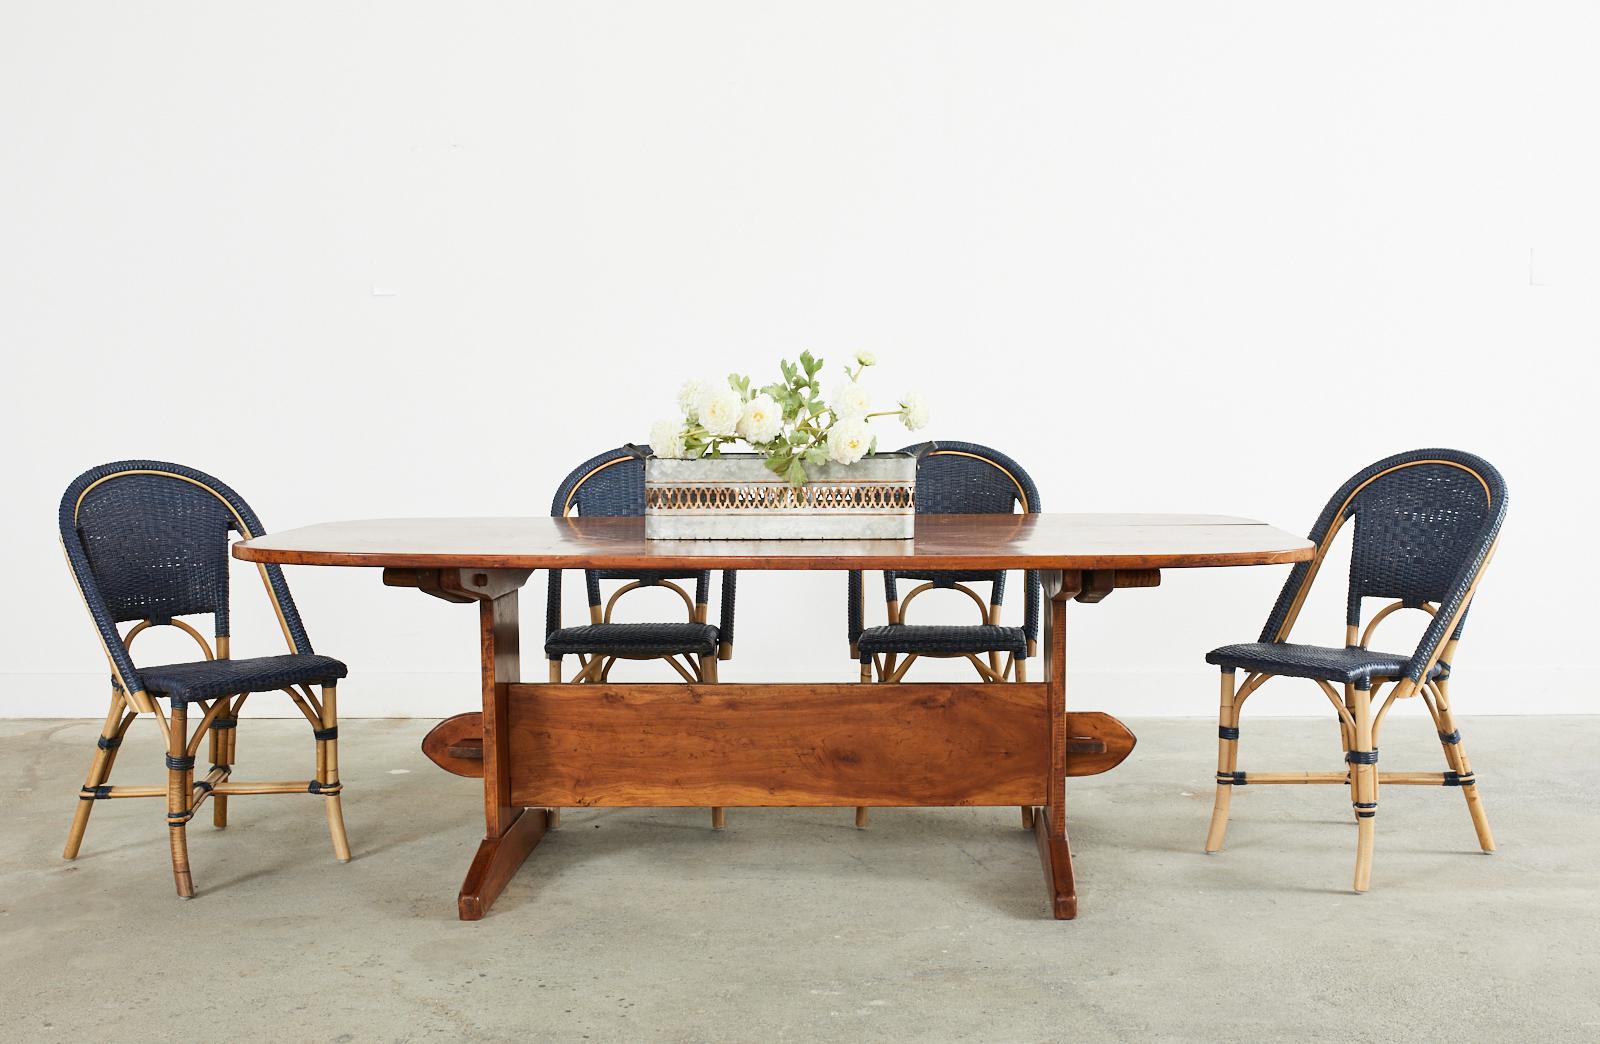 Gorgeous early 20th century French country farmhouse dining or harvest table crafted from fruitwood. The table features an oval plank top supported by a trestle style base with a large, exposed mortise and tenon joinery. The straight legs are